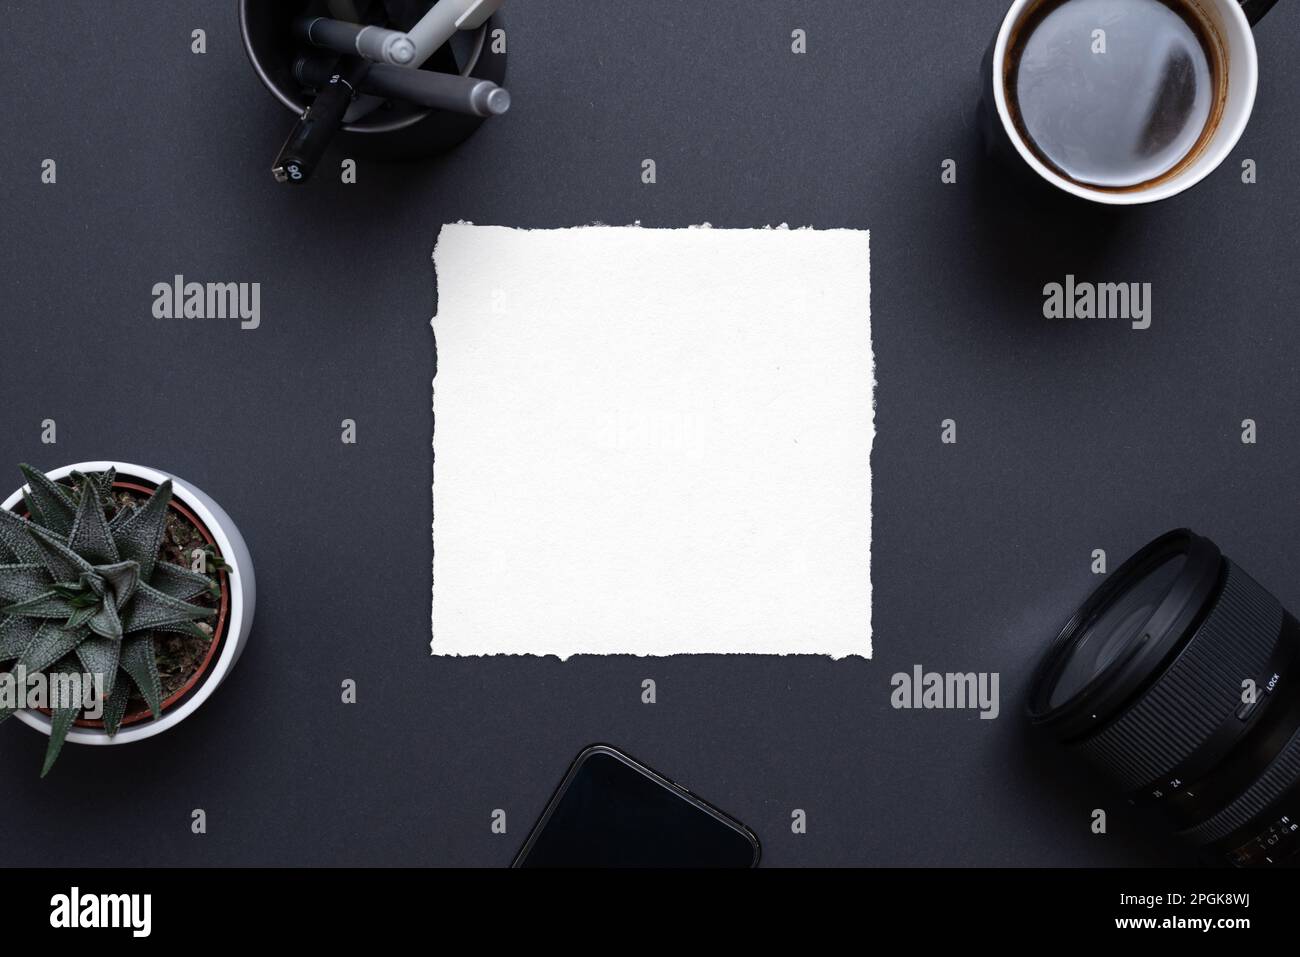 Blank paper frame on black office desk surrounded by phone, camera, coffee mug, plant and pens. Top view, flat lay composition for copy presentation Stock Photo